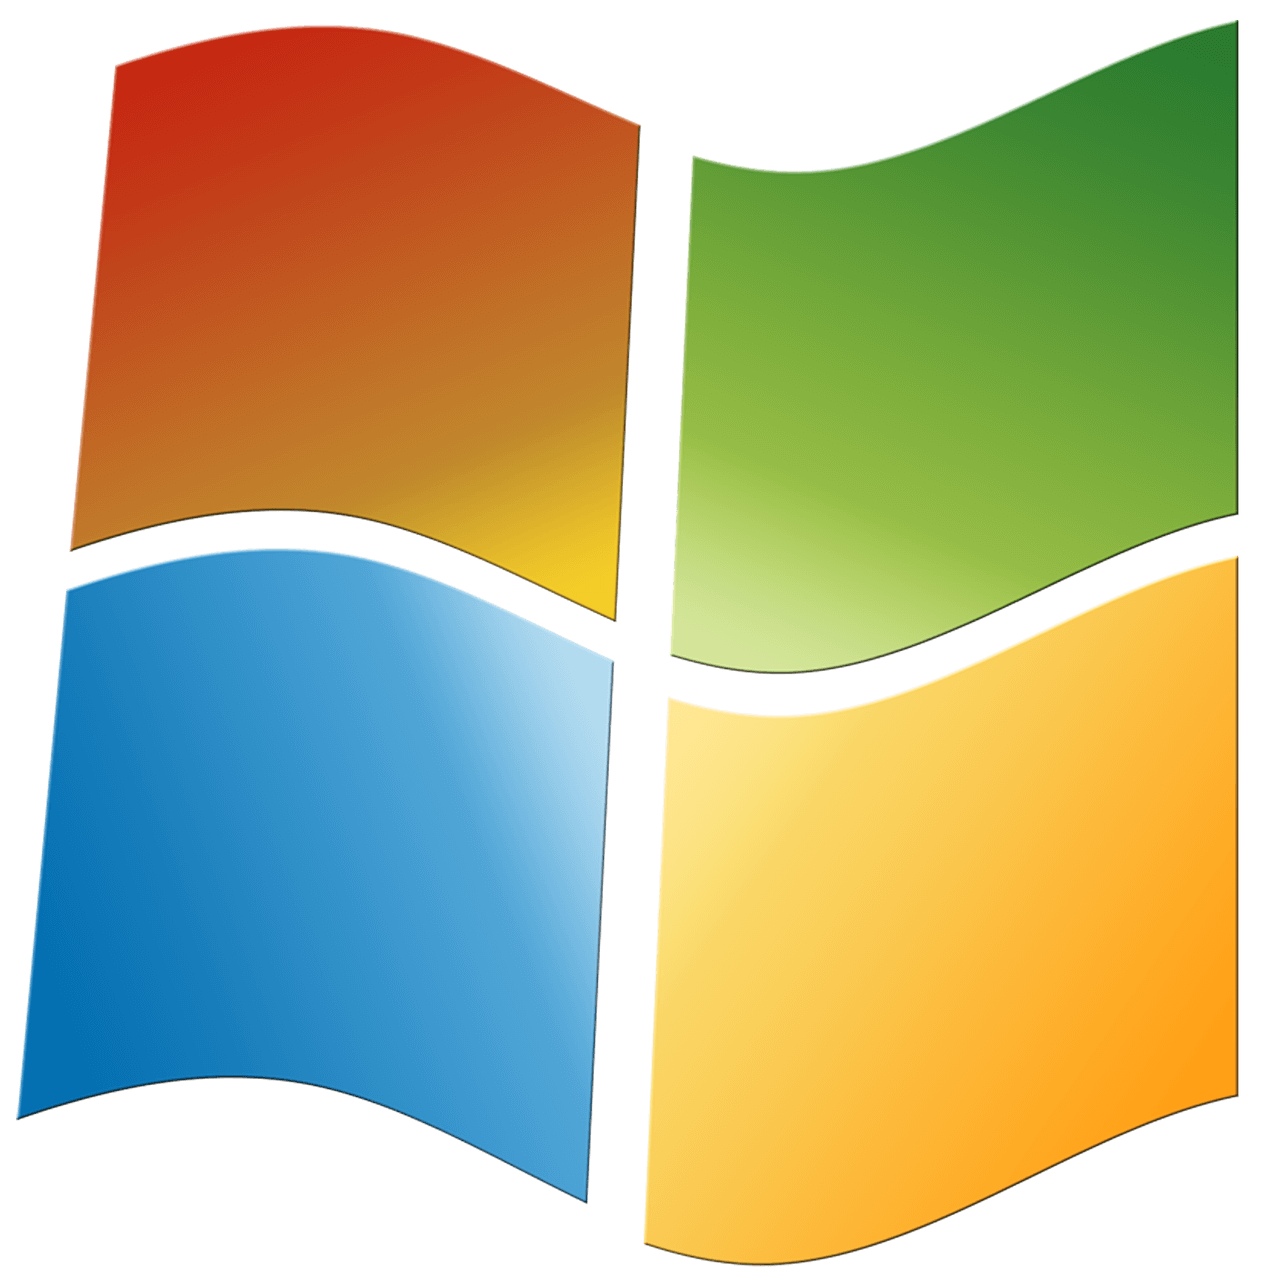 Download KB4503269 and KB4503292